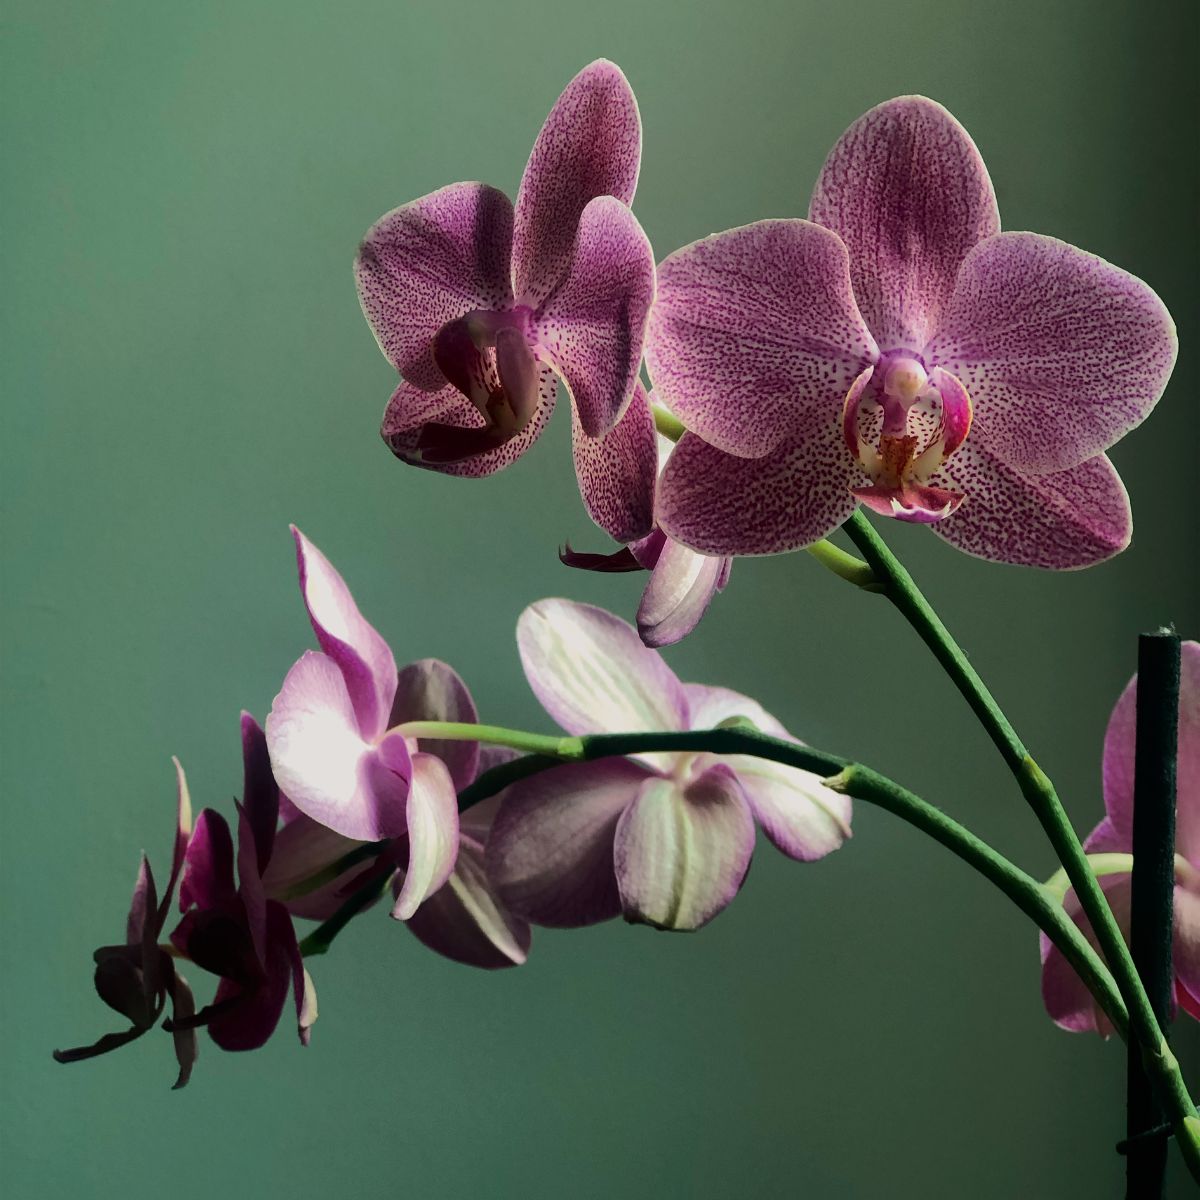 Vanda orchid is one of the seven bathroom plants to have in 2023